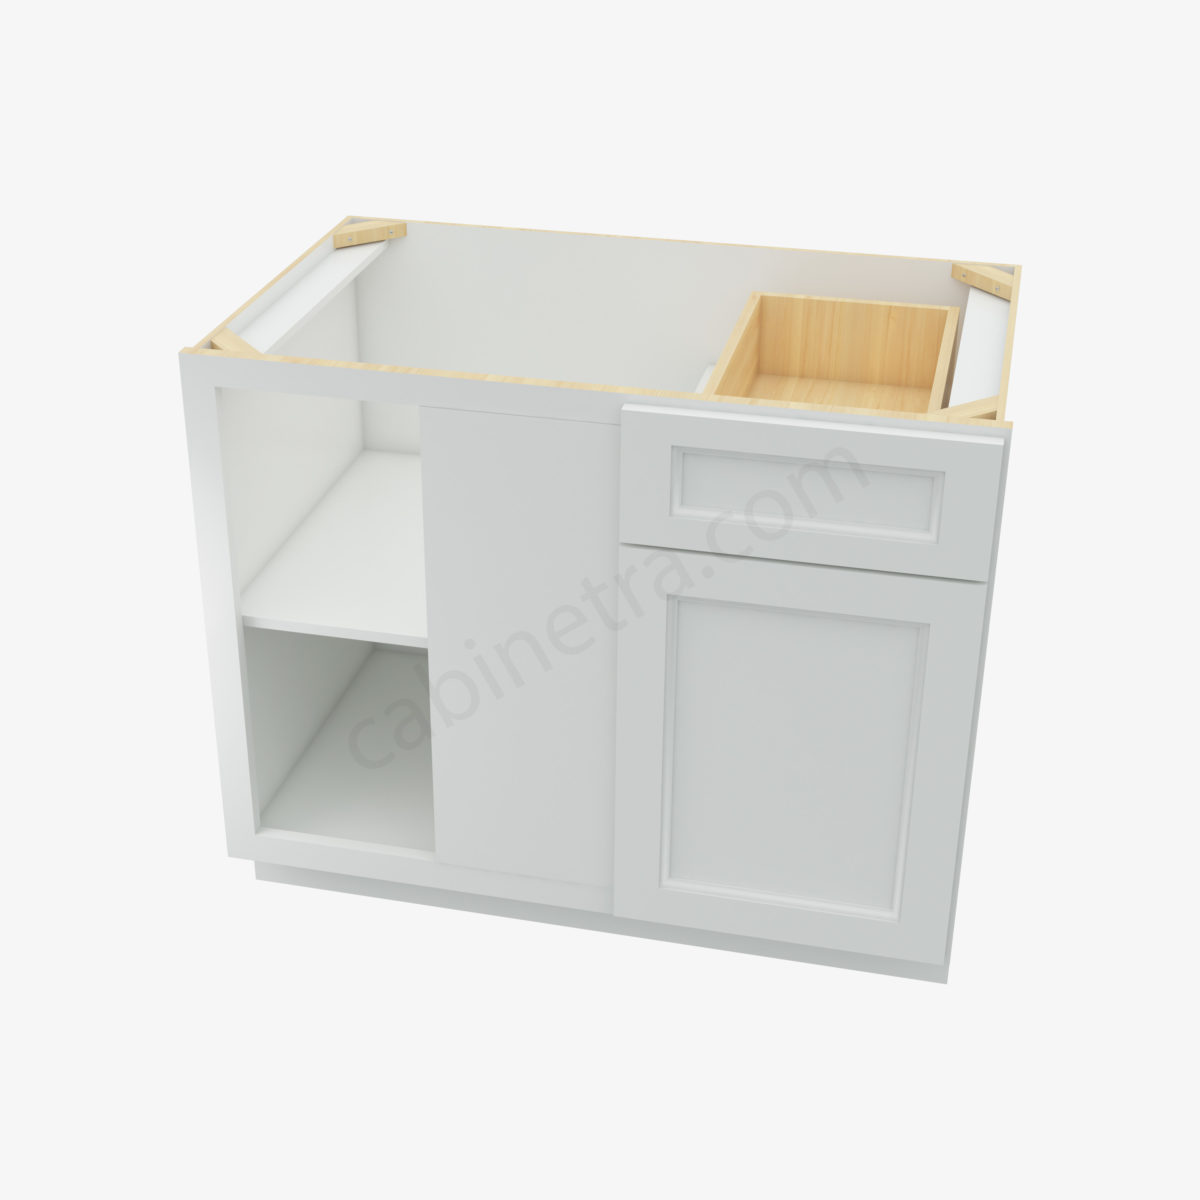 TW BBLC42 45 39W 3 Forevermark Uptown White Cabinetra scaled